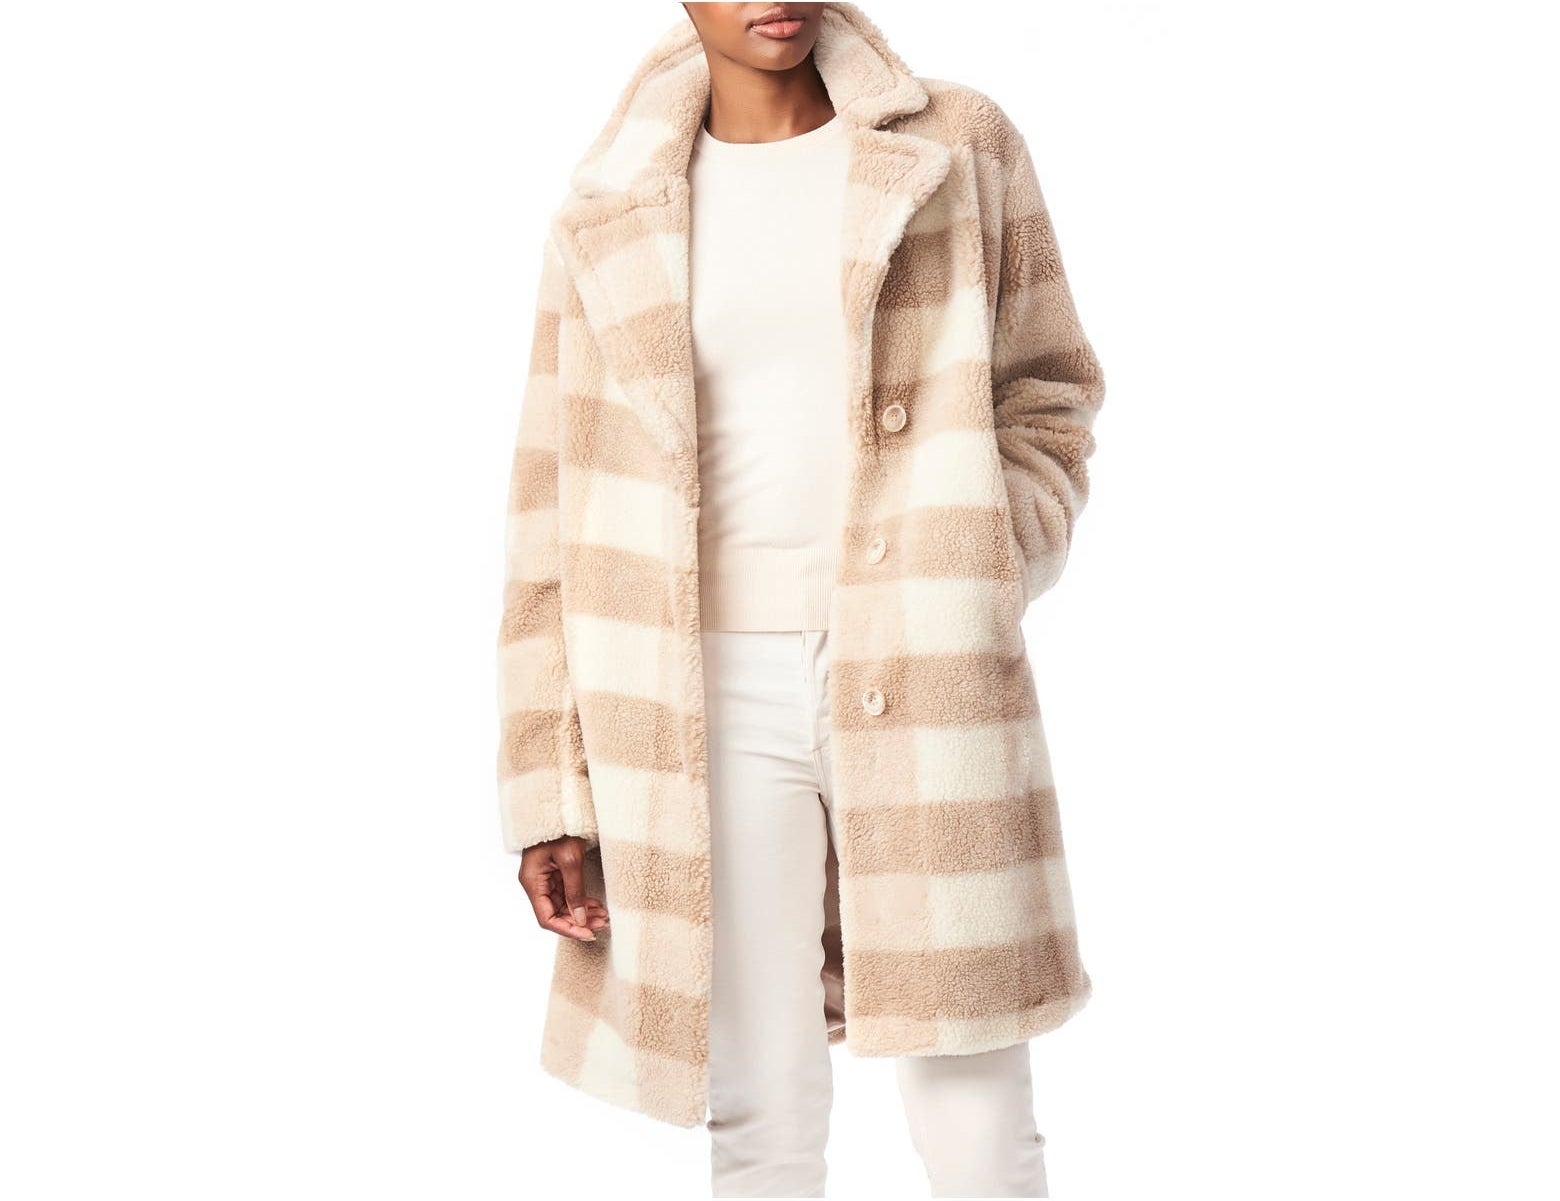 Model wearing the cream and tan check collared coat